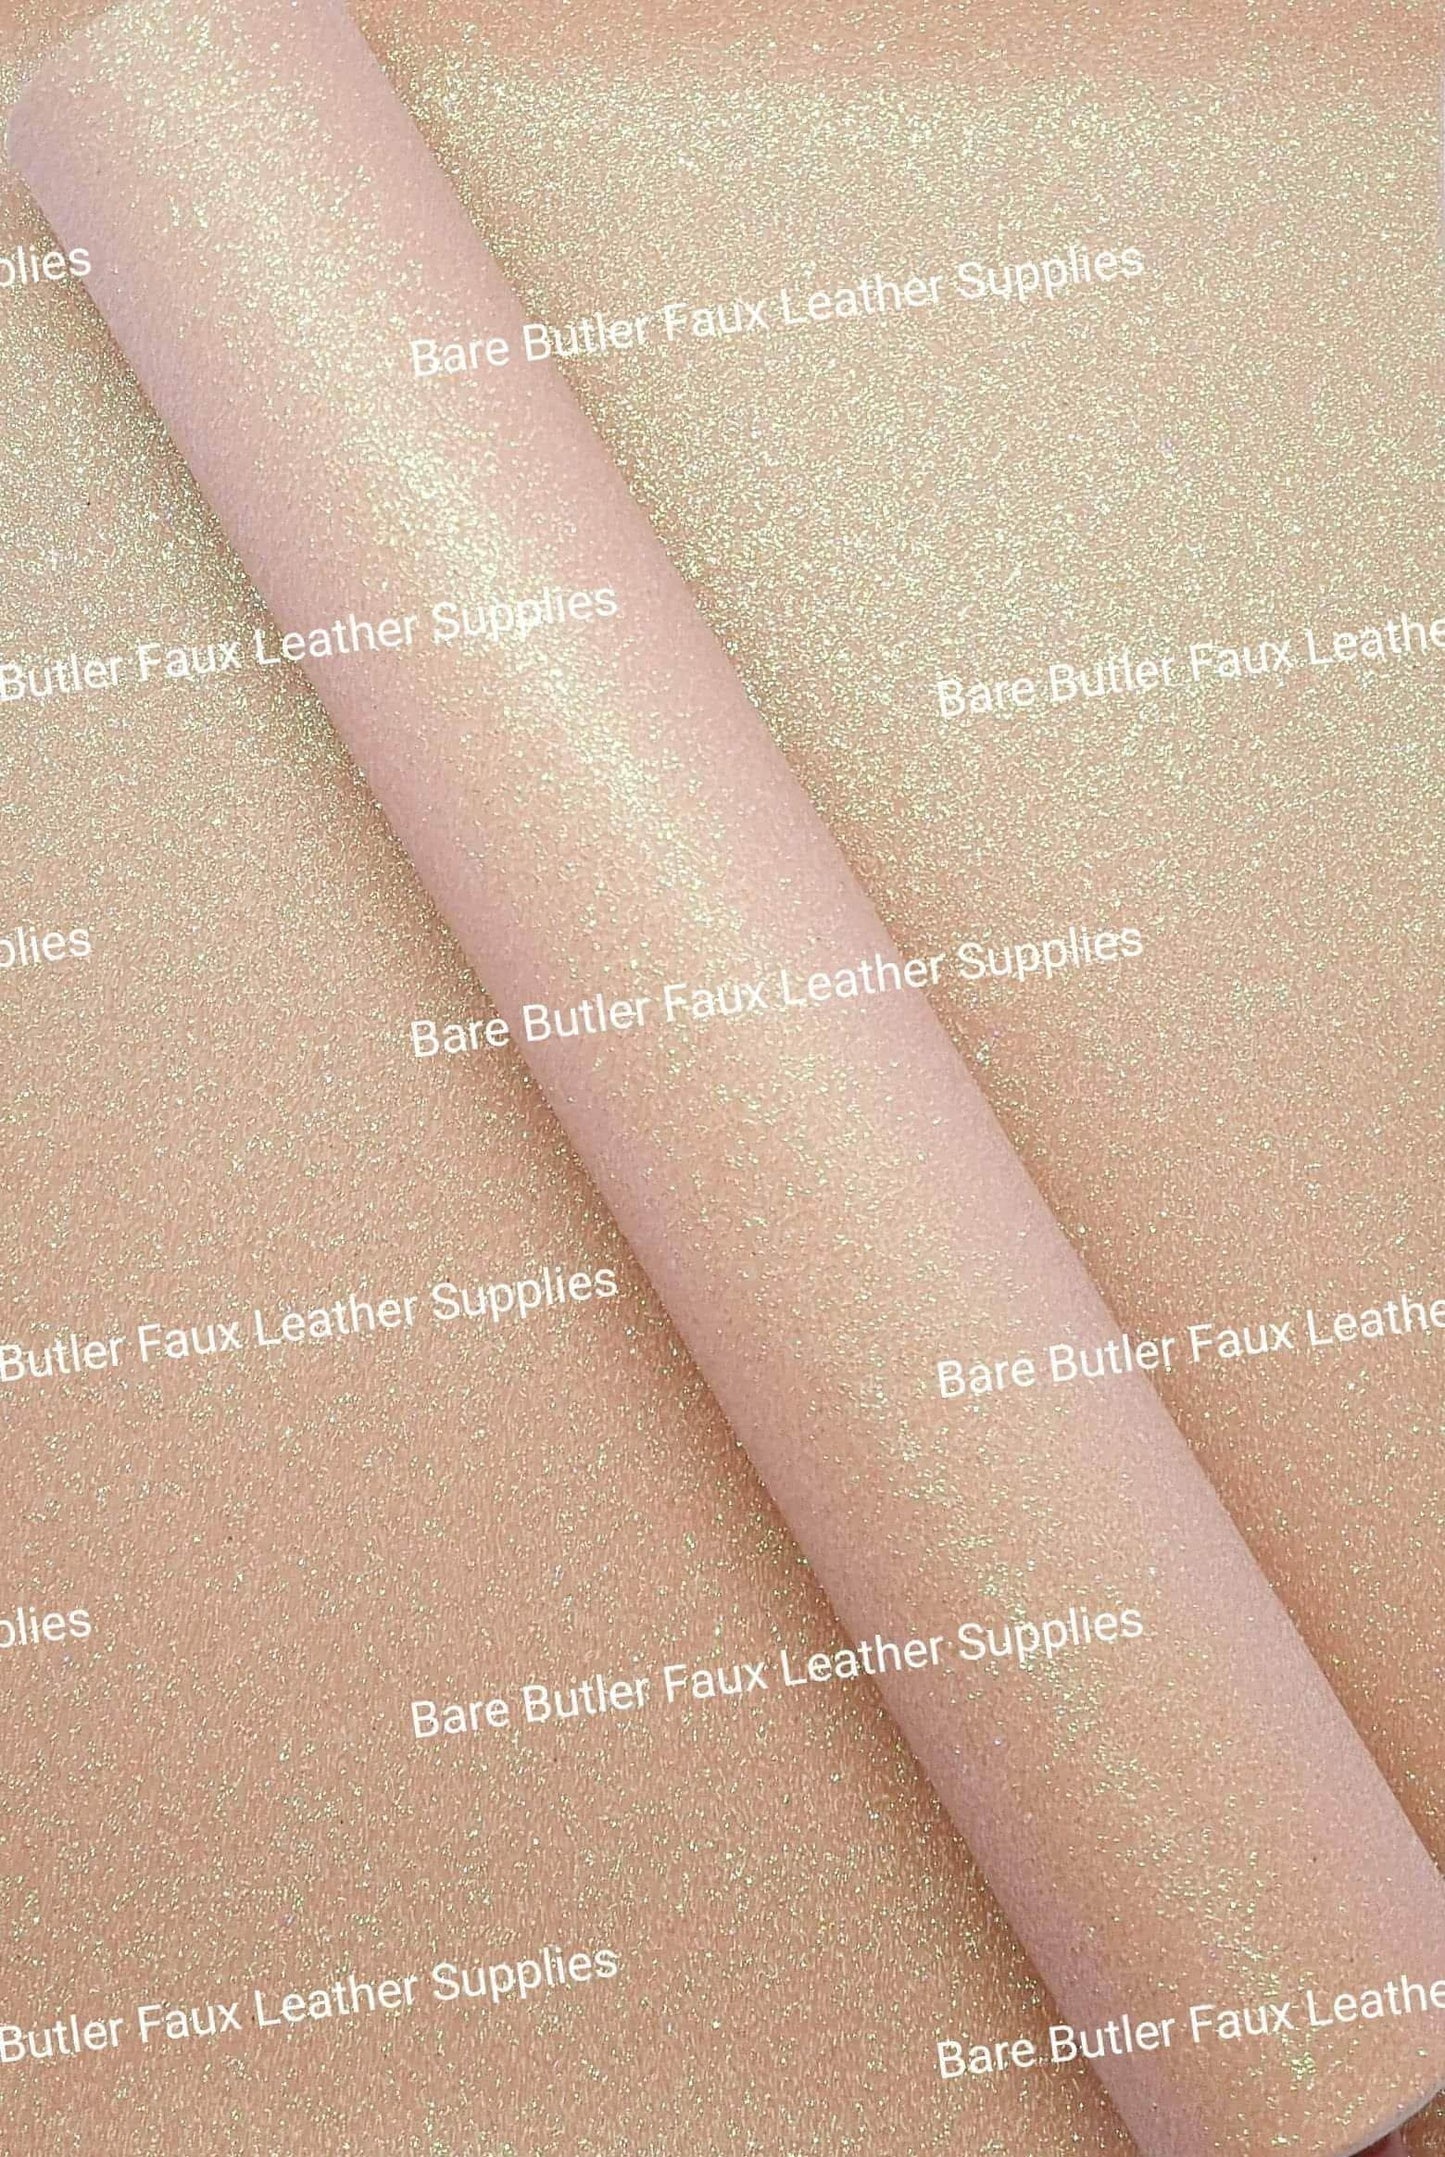 Glitter - Apricot - Berry, Faux, Faux Leather, Fine, Glitter, Leather, leatherette, Super - Bare Butler Faux Leather Supplies 